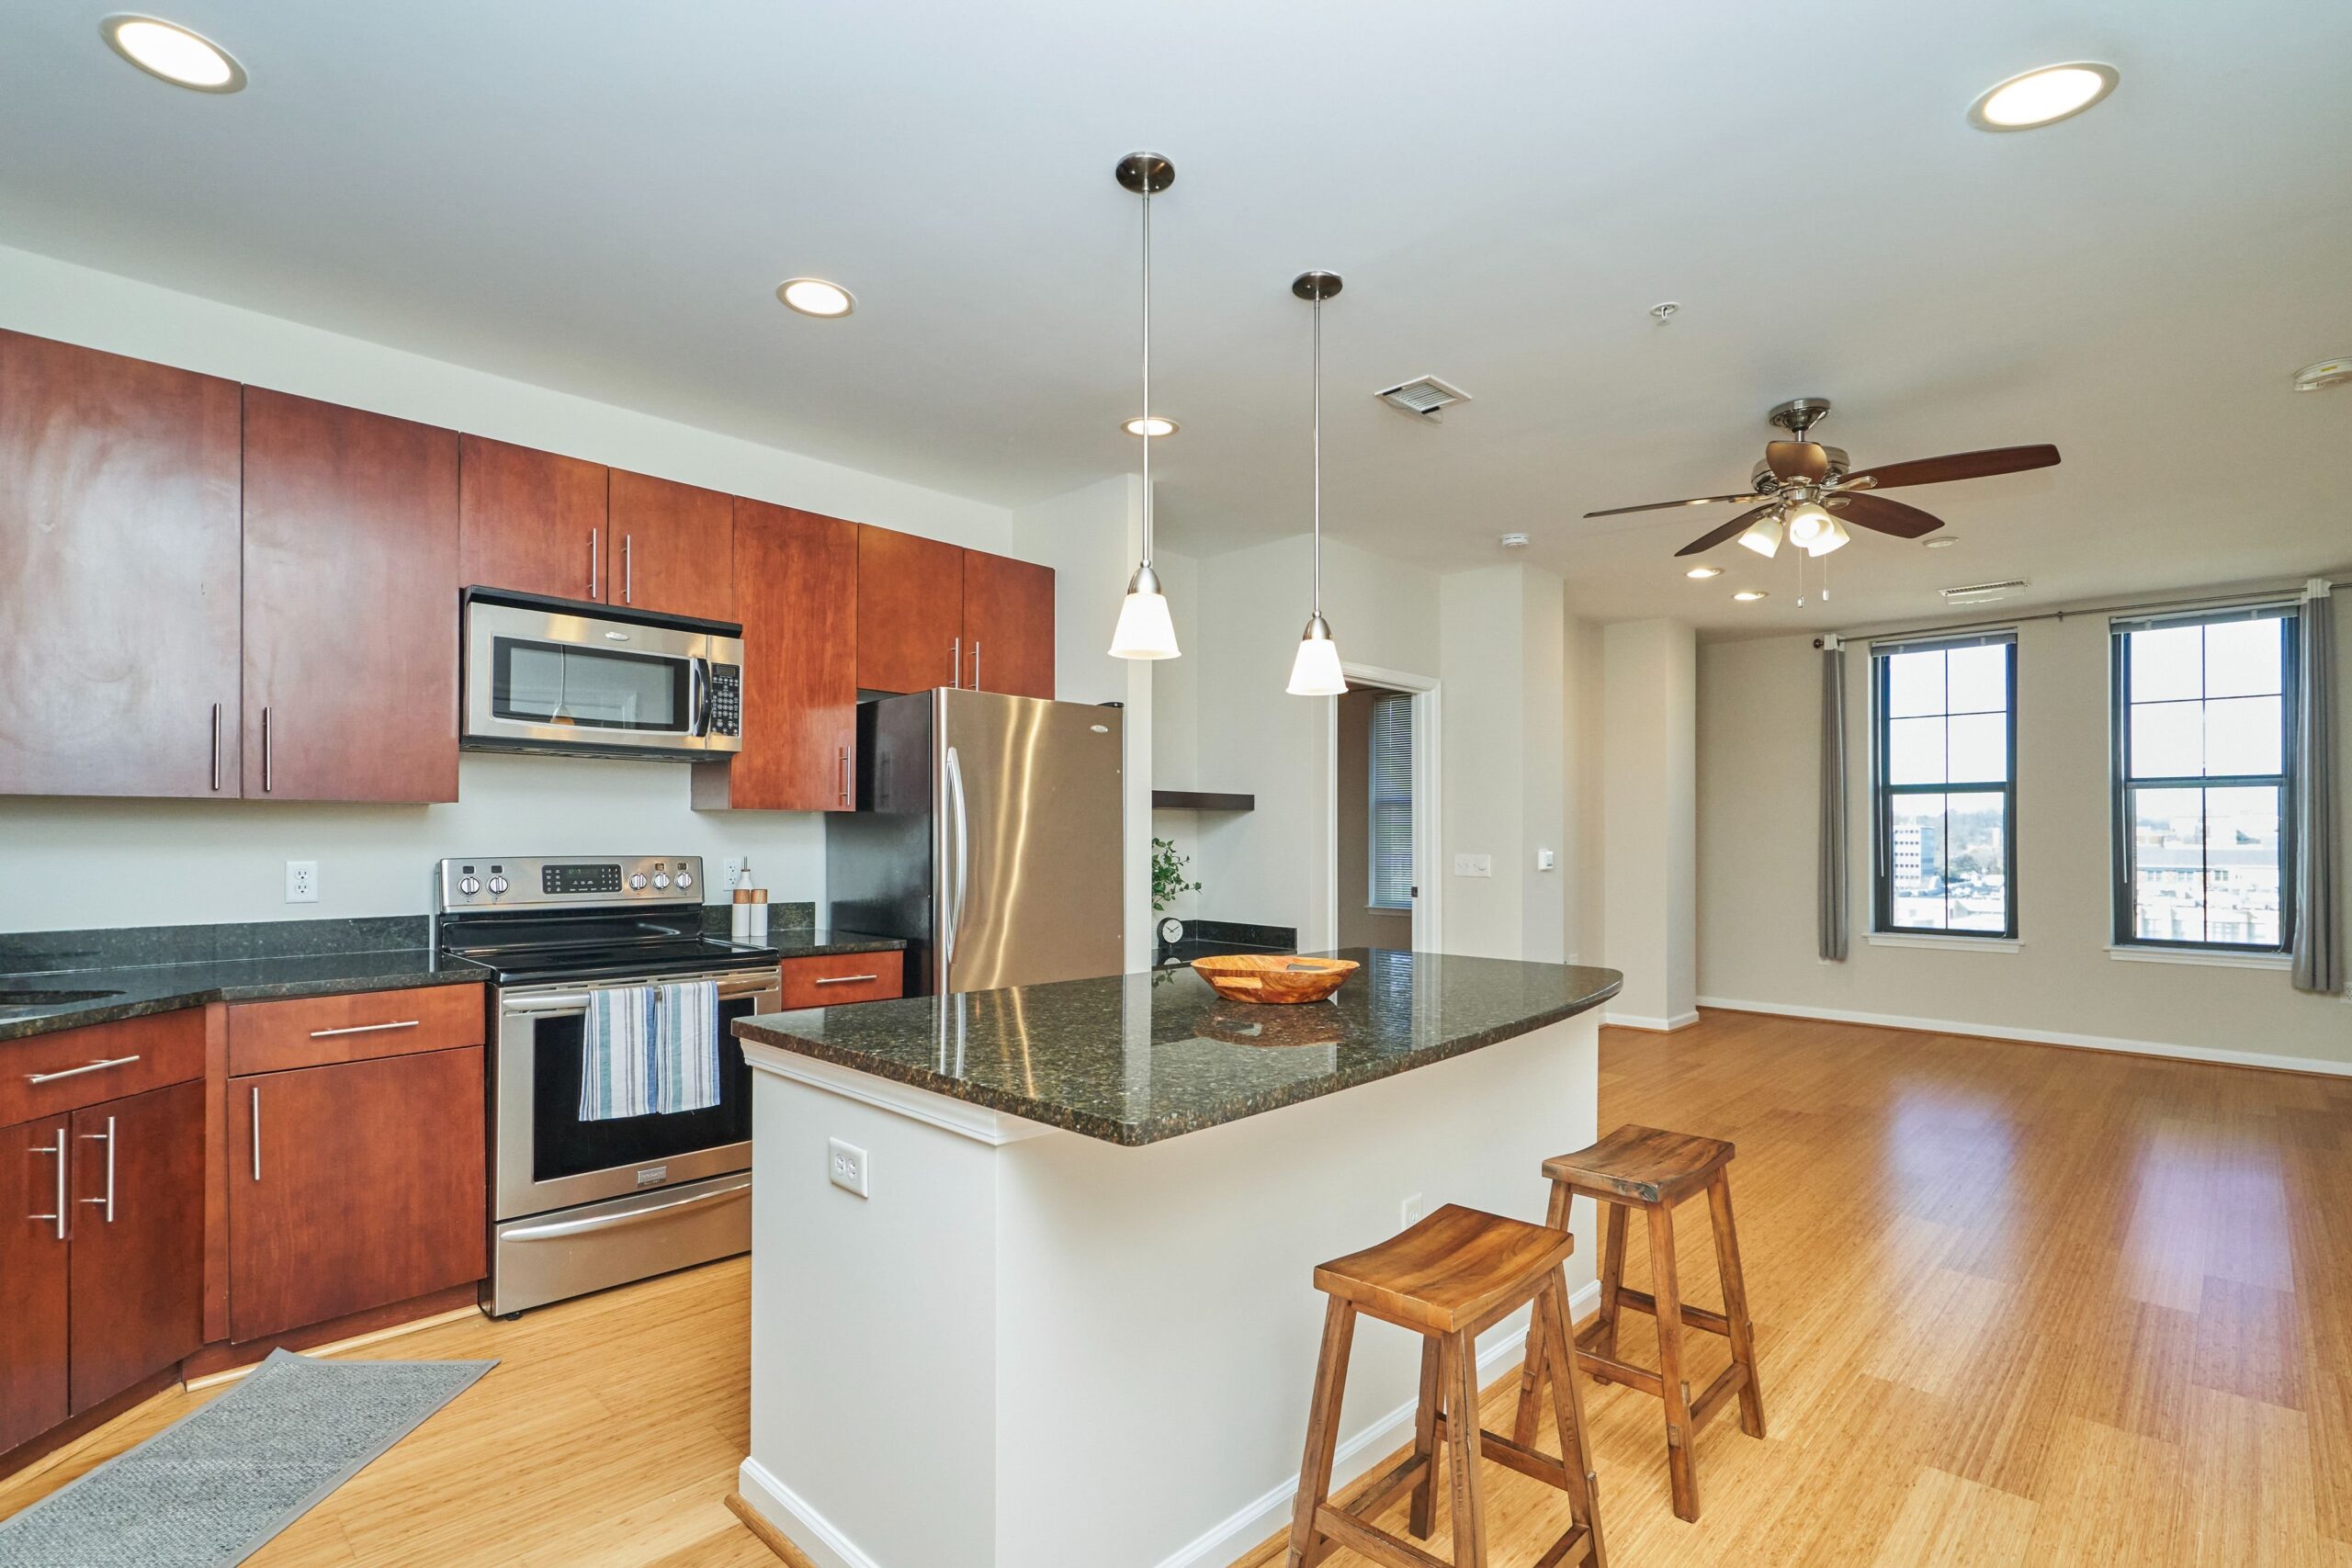 Professional interior photo of 444 W Broad St Unit 631 - showing the open kitchen and living area with granite island, hardwood floors, ceiling fan